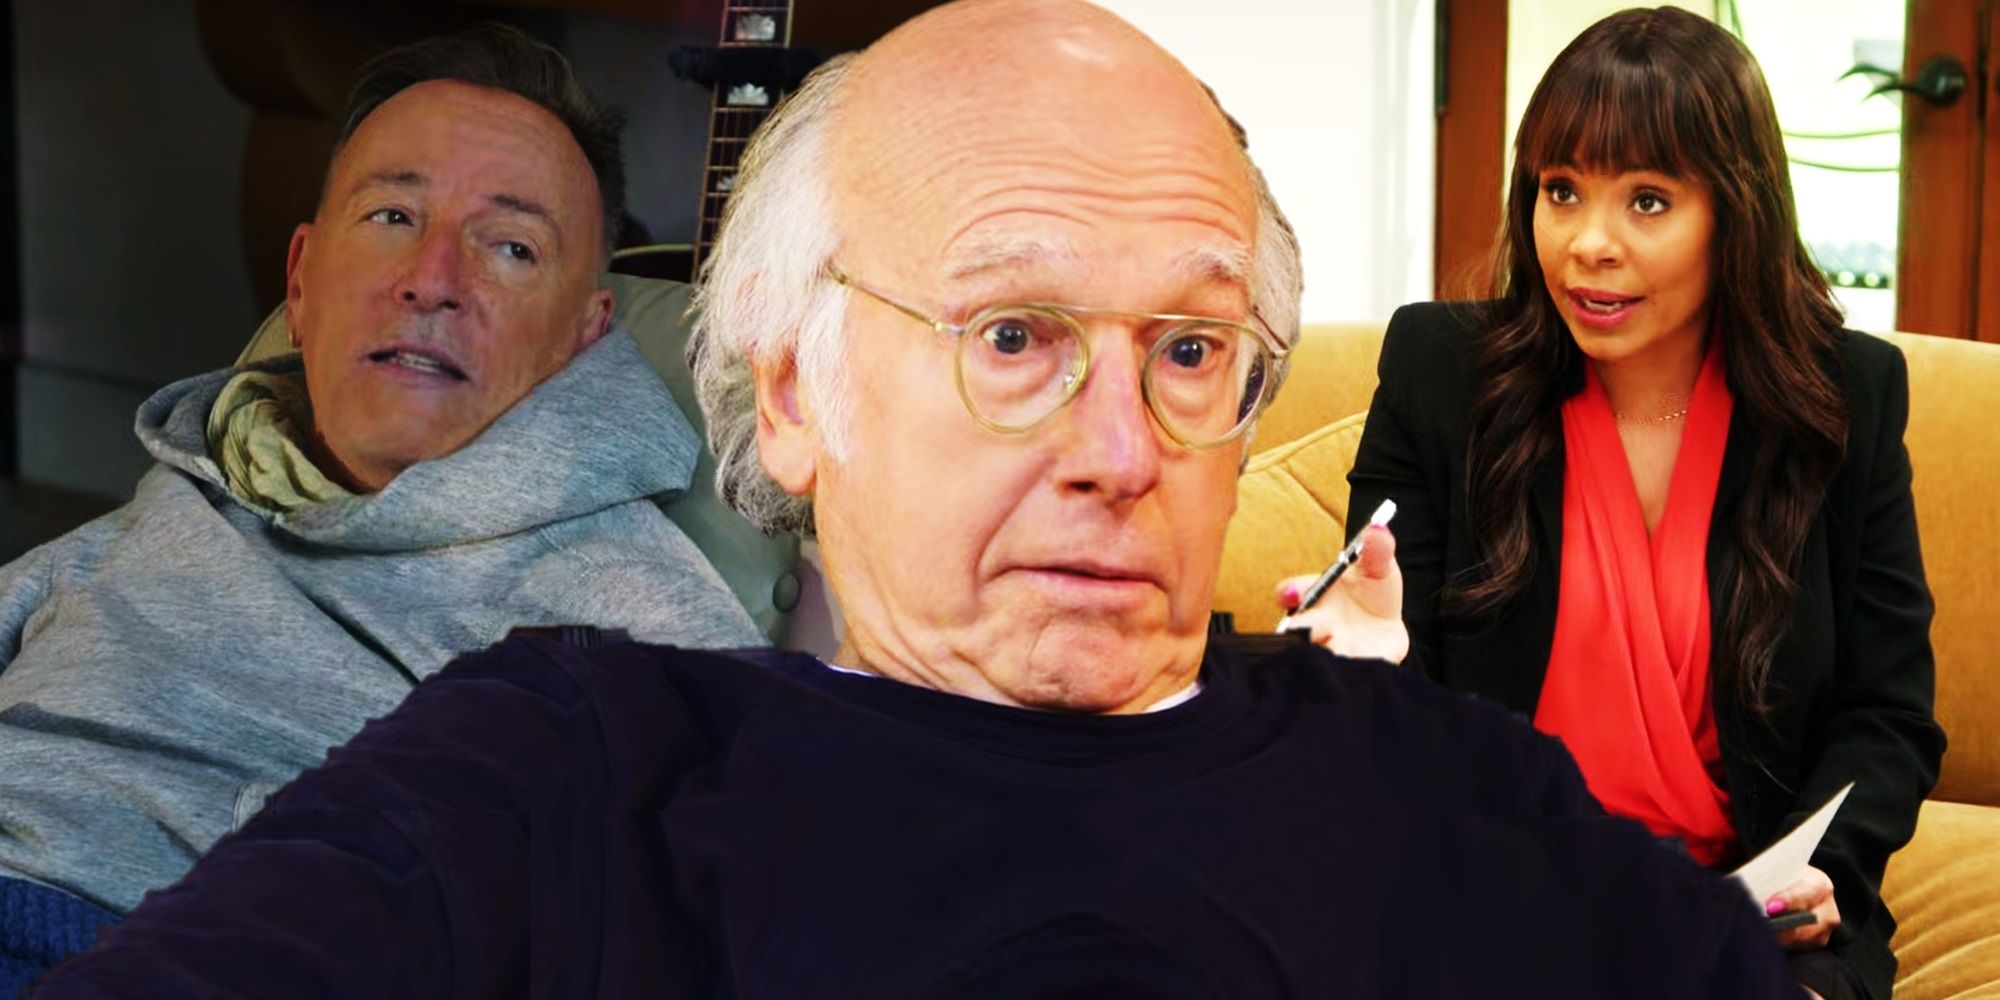 Collage of Larry, Bruce Springsteen, and Sanaa Lathan in Curb Your Enthusiasm